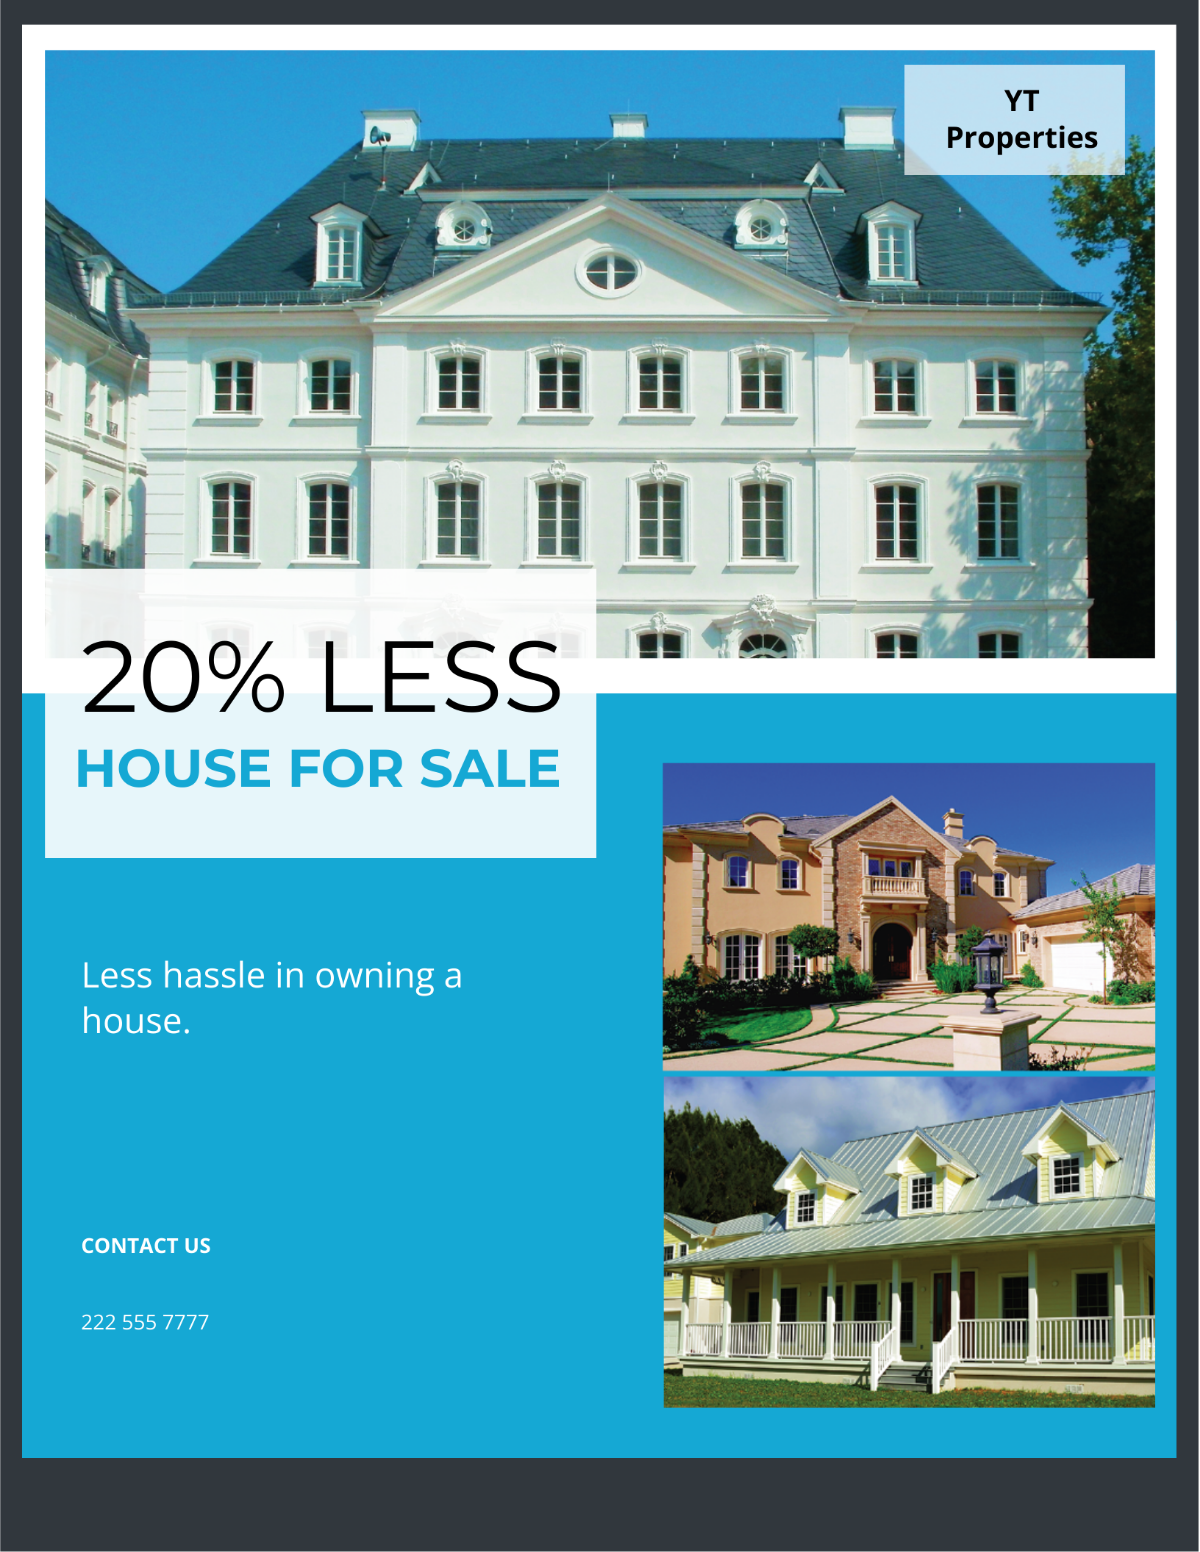 House for Sale Flyer Template